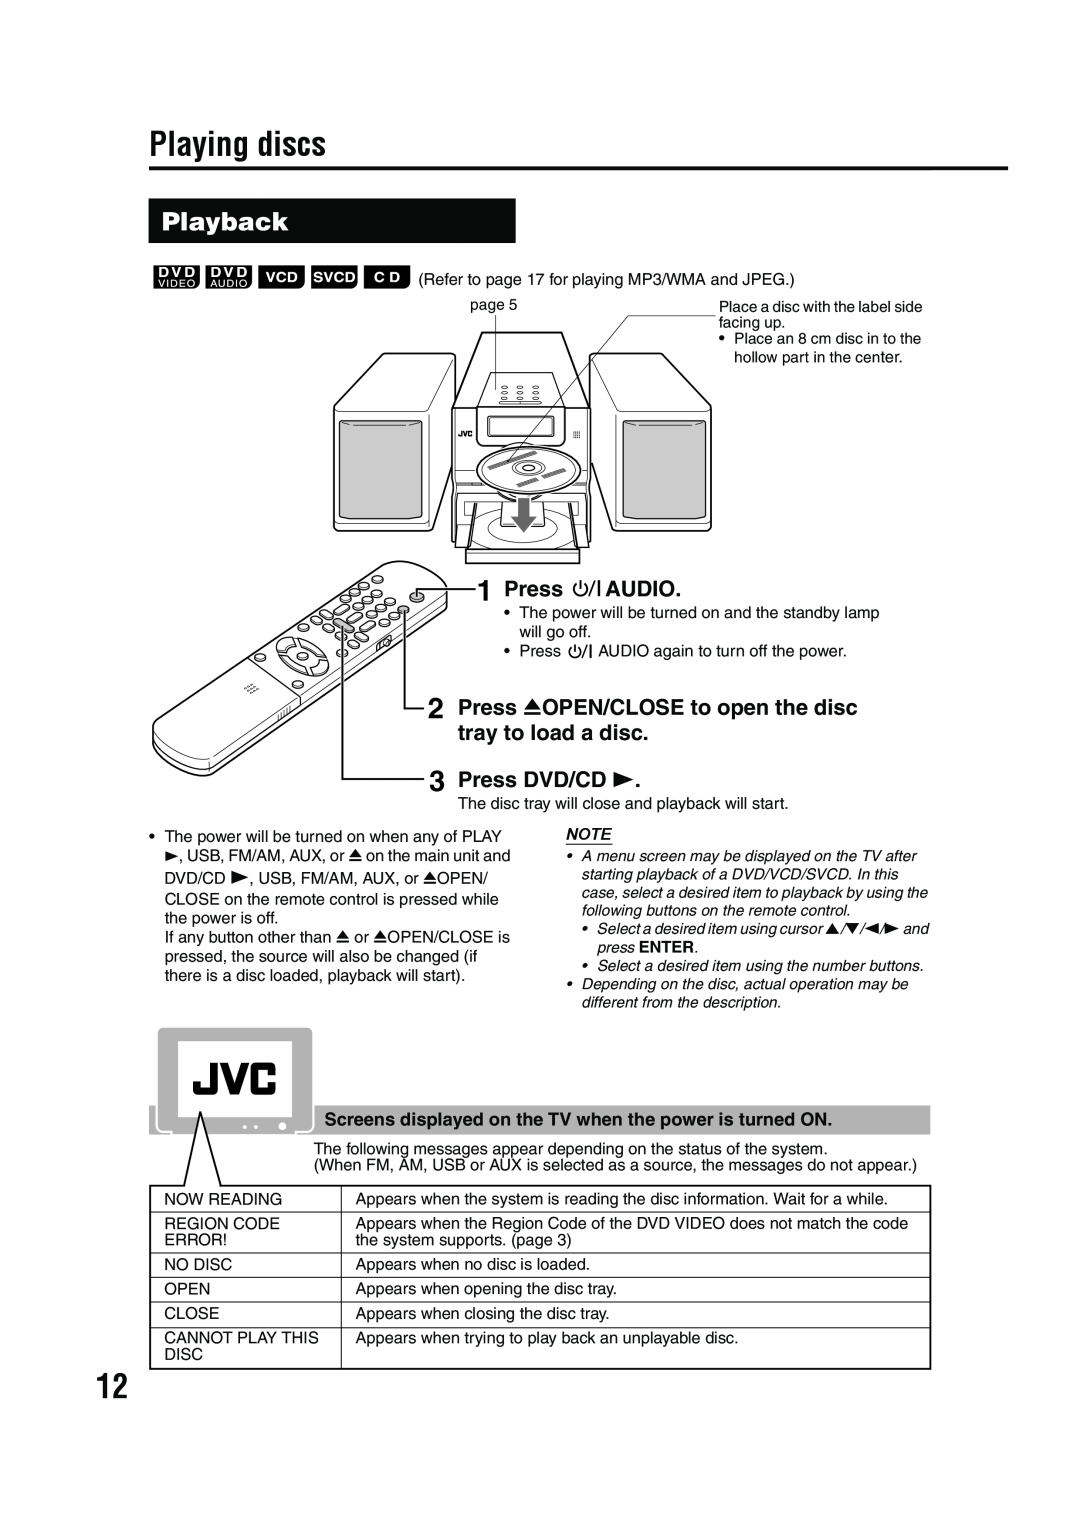 JVC GVT0143-008A Playing discs, Playback, Audio, Press 0OPEN/CLOSE to open the disc, tray to load a disc, Press DVD/CD 